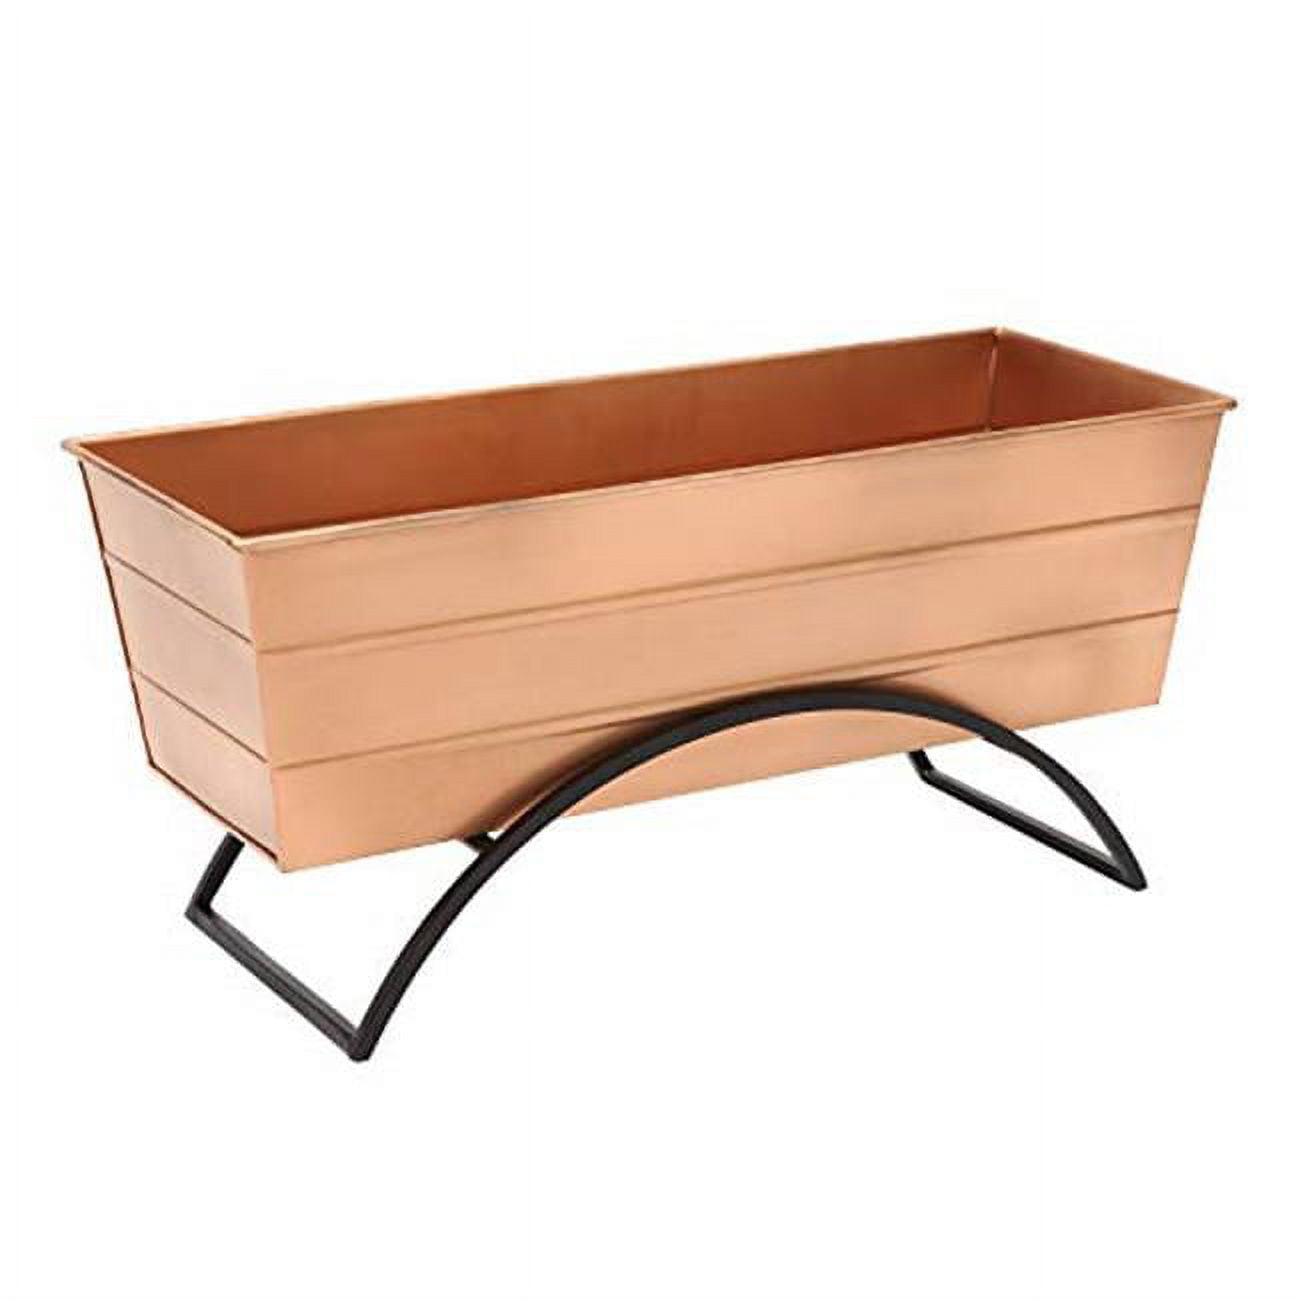 Achla C-20c-s Odette Stand With Flower Box, Copper - Medium